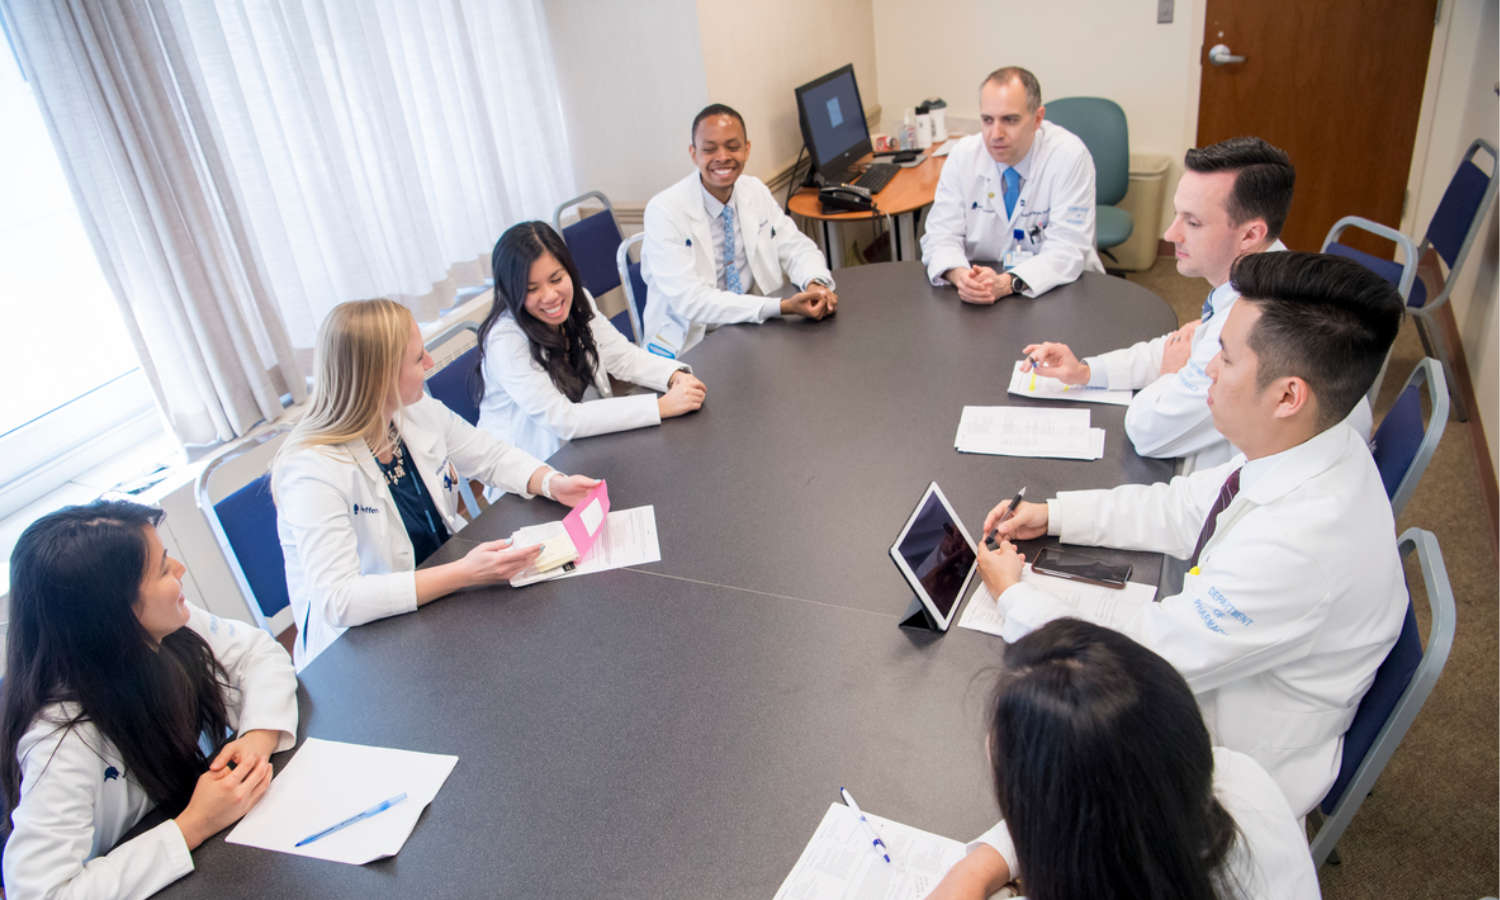 healthcare providers sitting around a conference table discussing topics